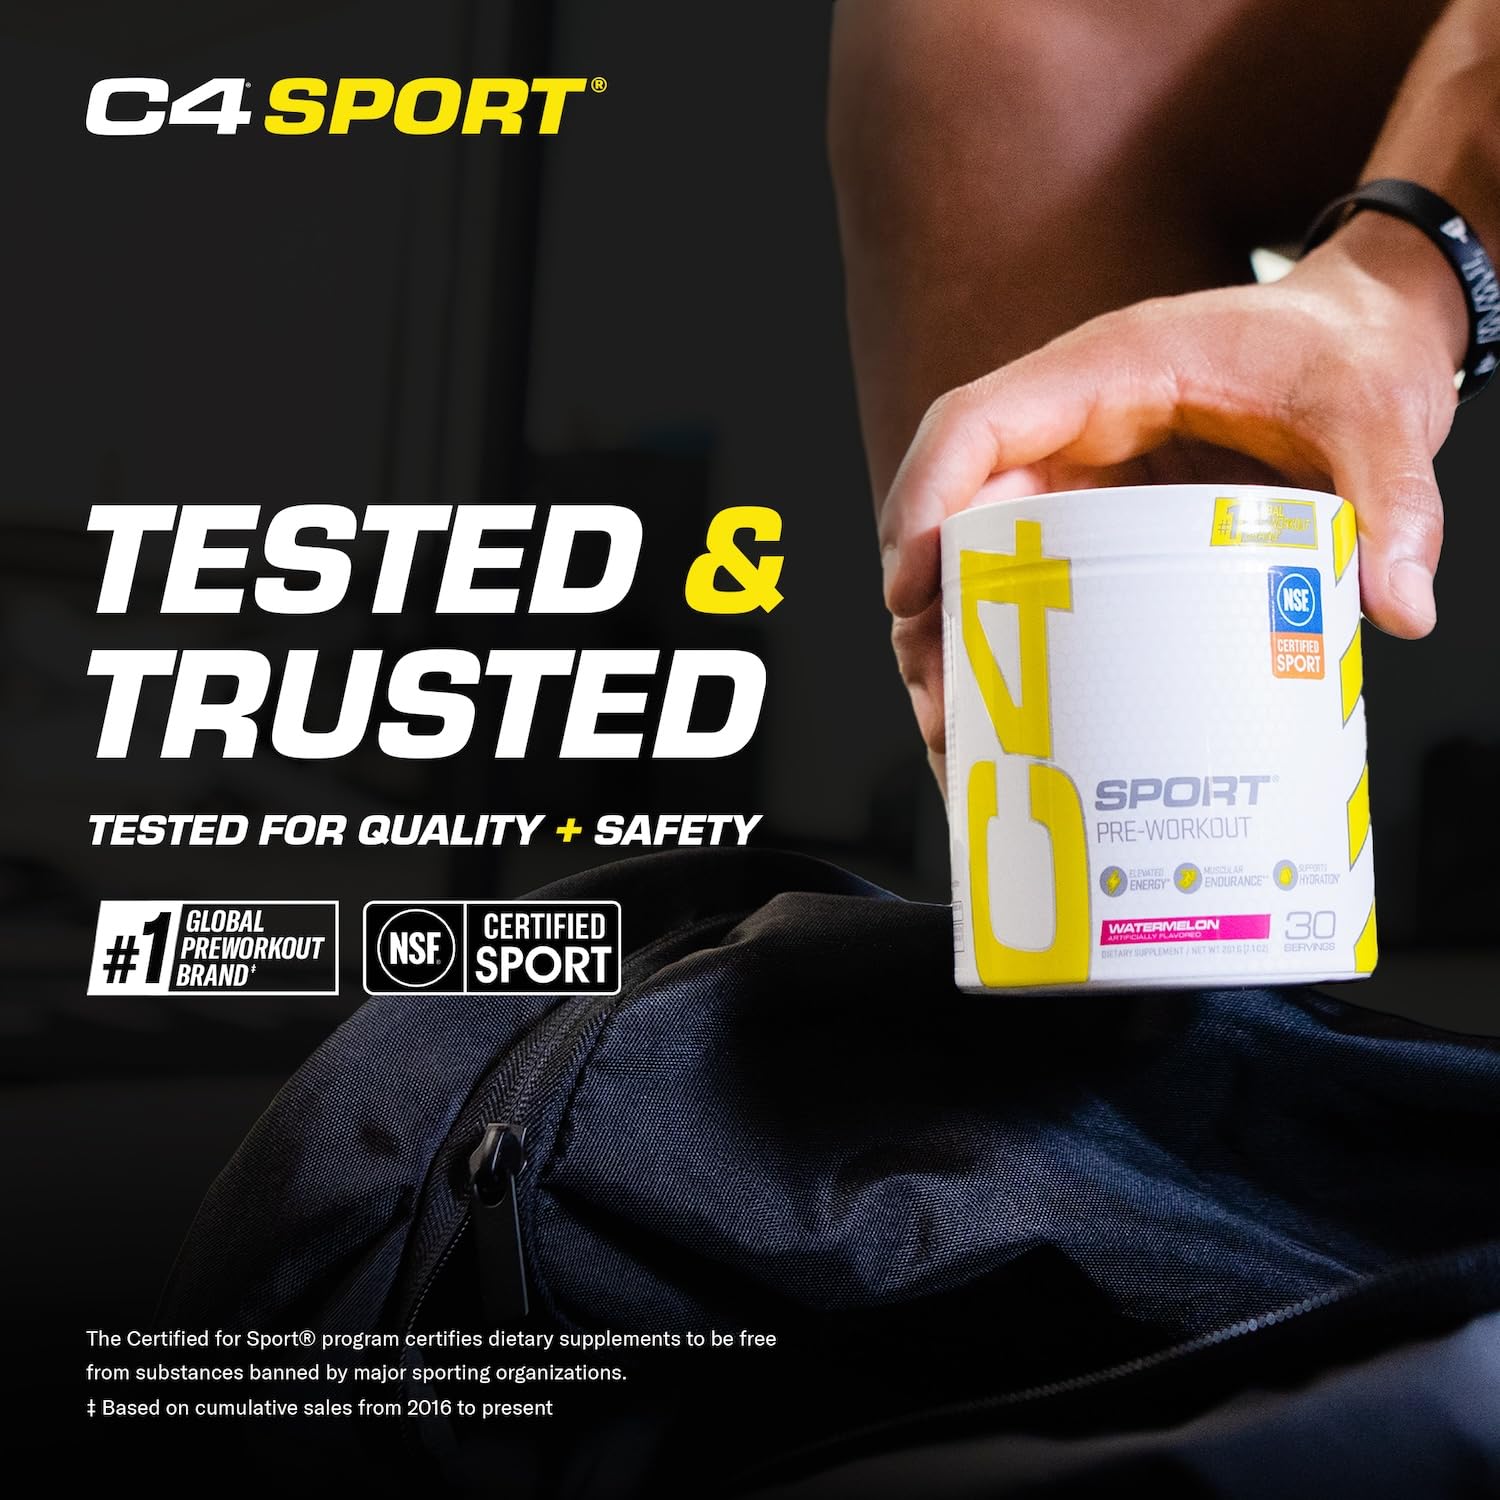 C4 Ripped Sport Pre Workout Powder Fruit Punch - NSF Certified for Sport + Sugar Free & C4 Sport Pre Workout Powder Watermelon - Pre Workout Energy with Creatine + 135mg Caffeine